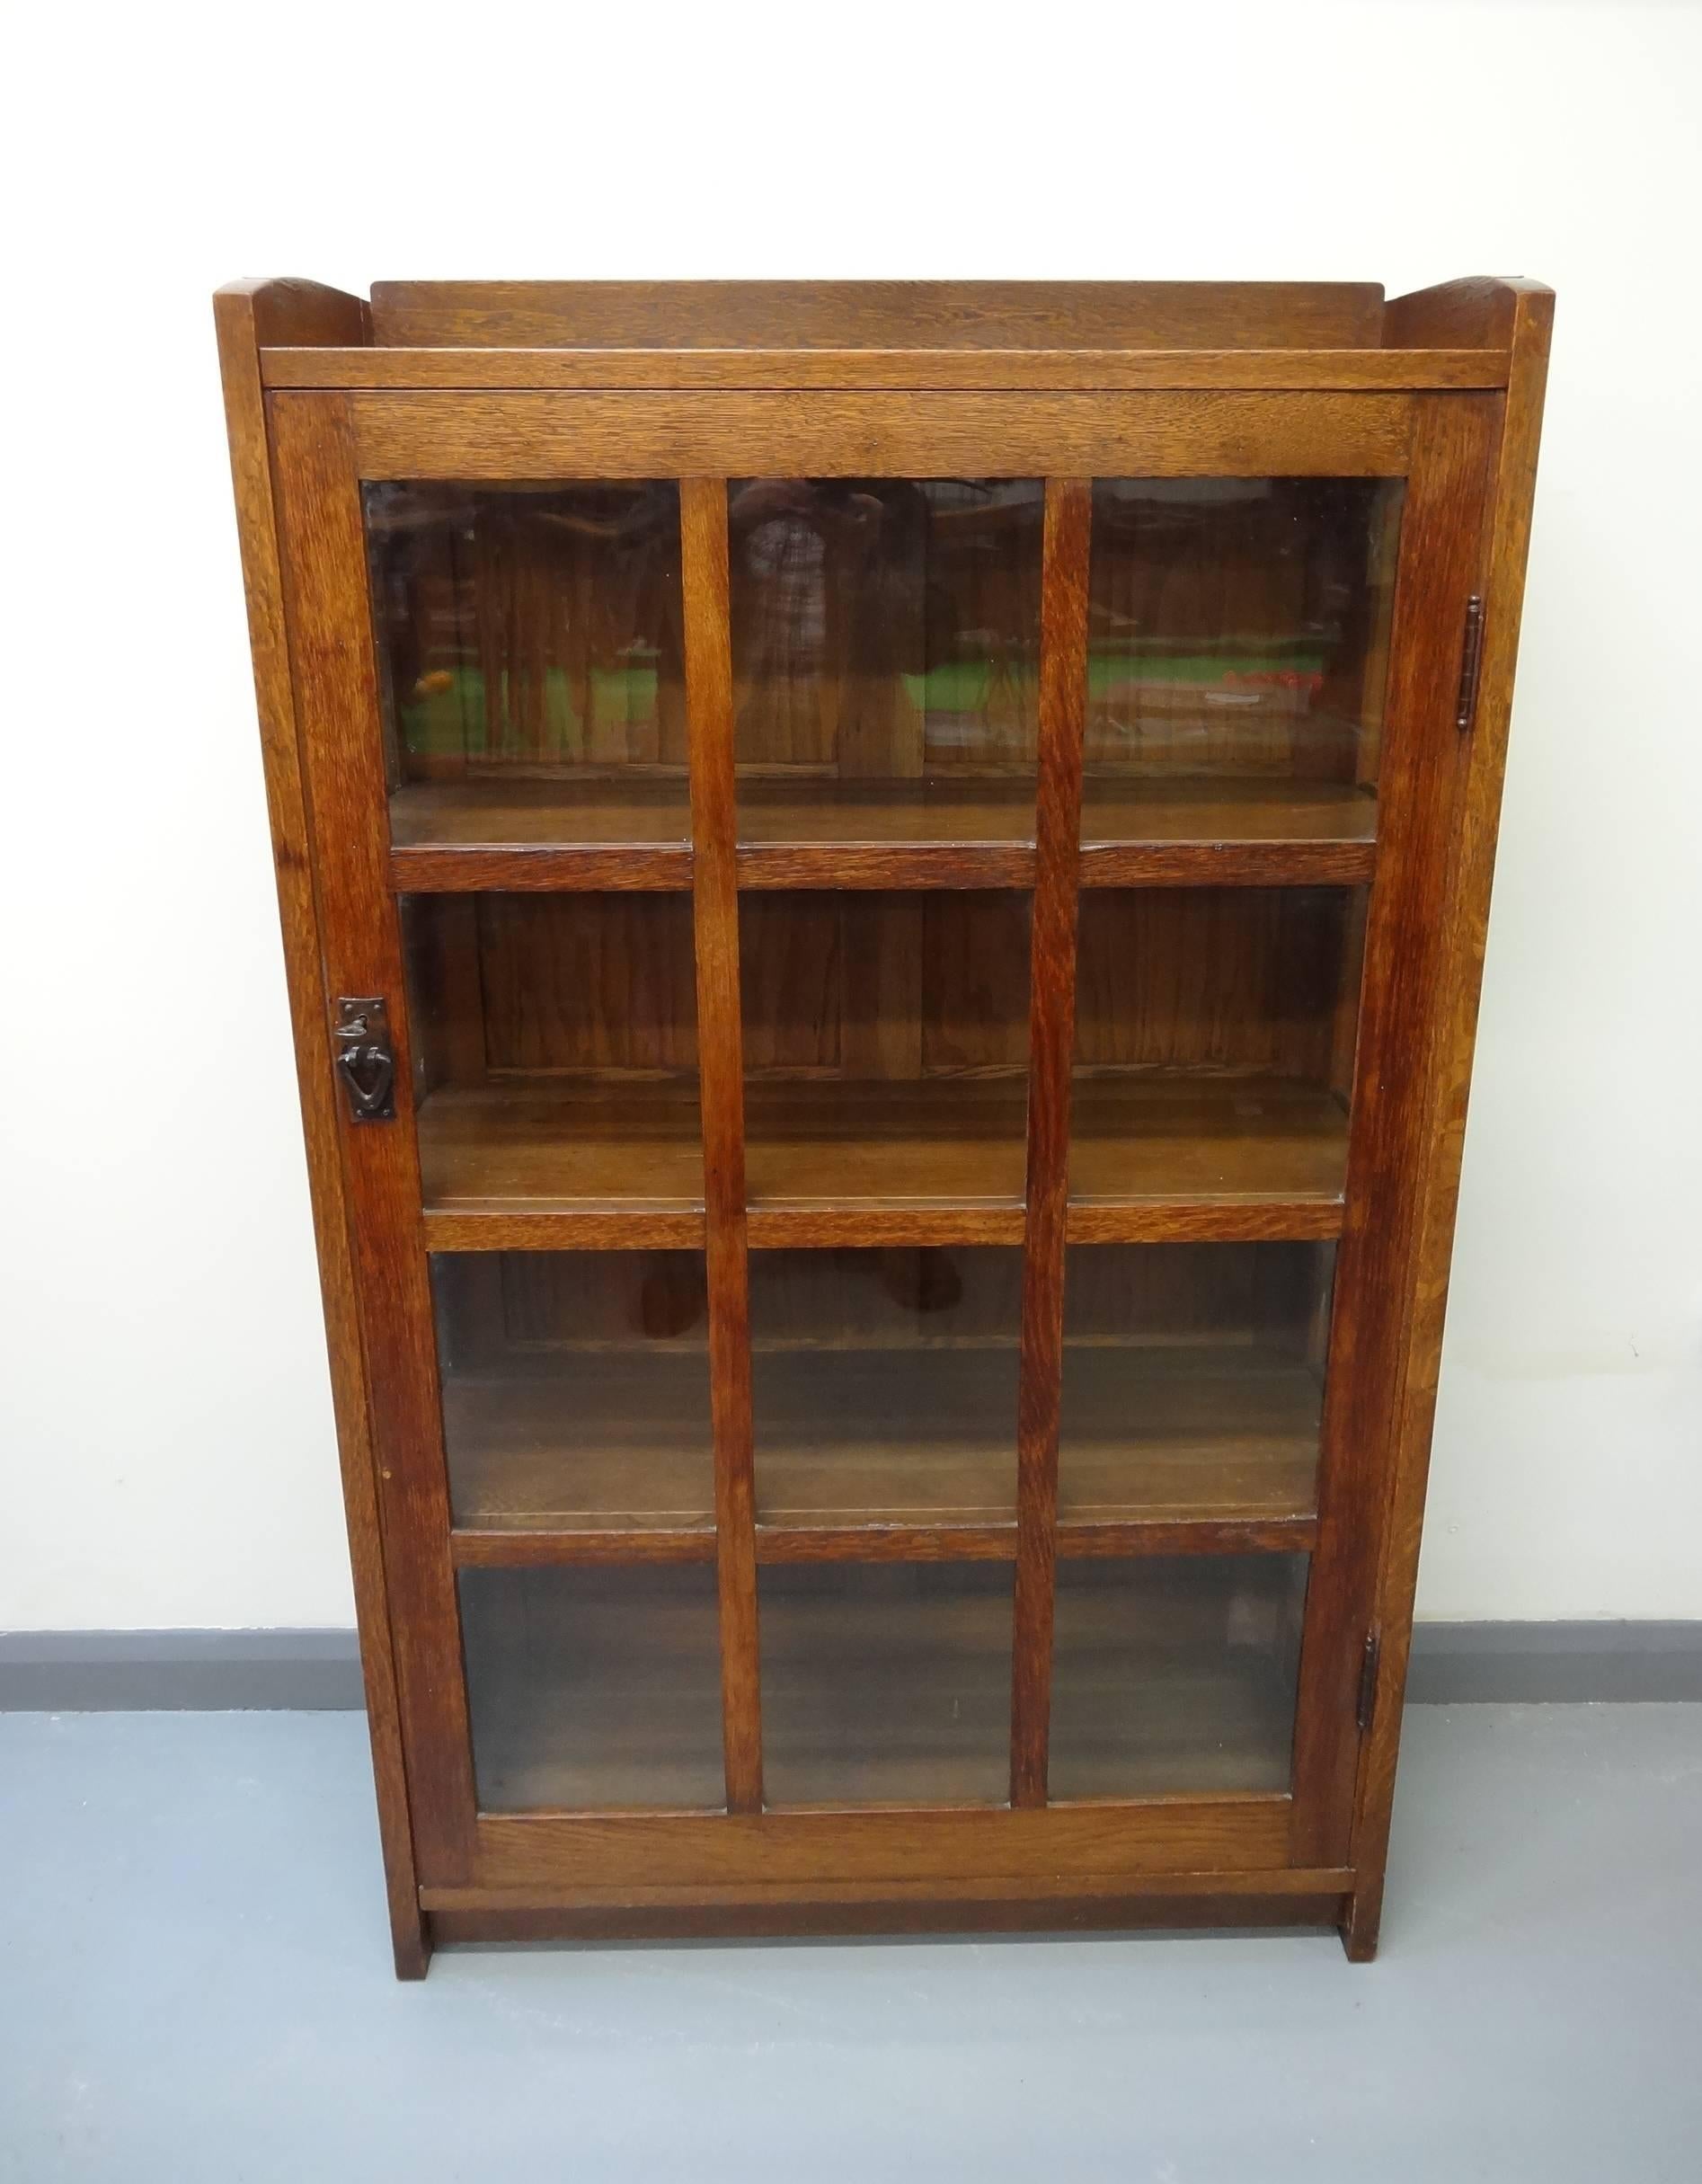 Superb American Arts & Crafts/Mission oak glazed china bookcase cabinet by the master, Gustav Stickley, circa 1903.

Original label to back. Plus its lovely original key. 
Although normally categorised as a china cabinet, the label (not very